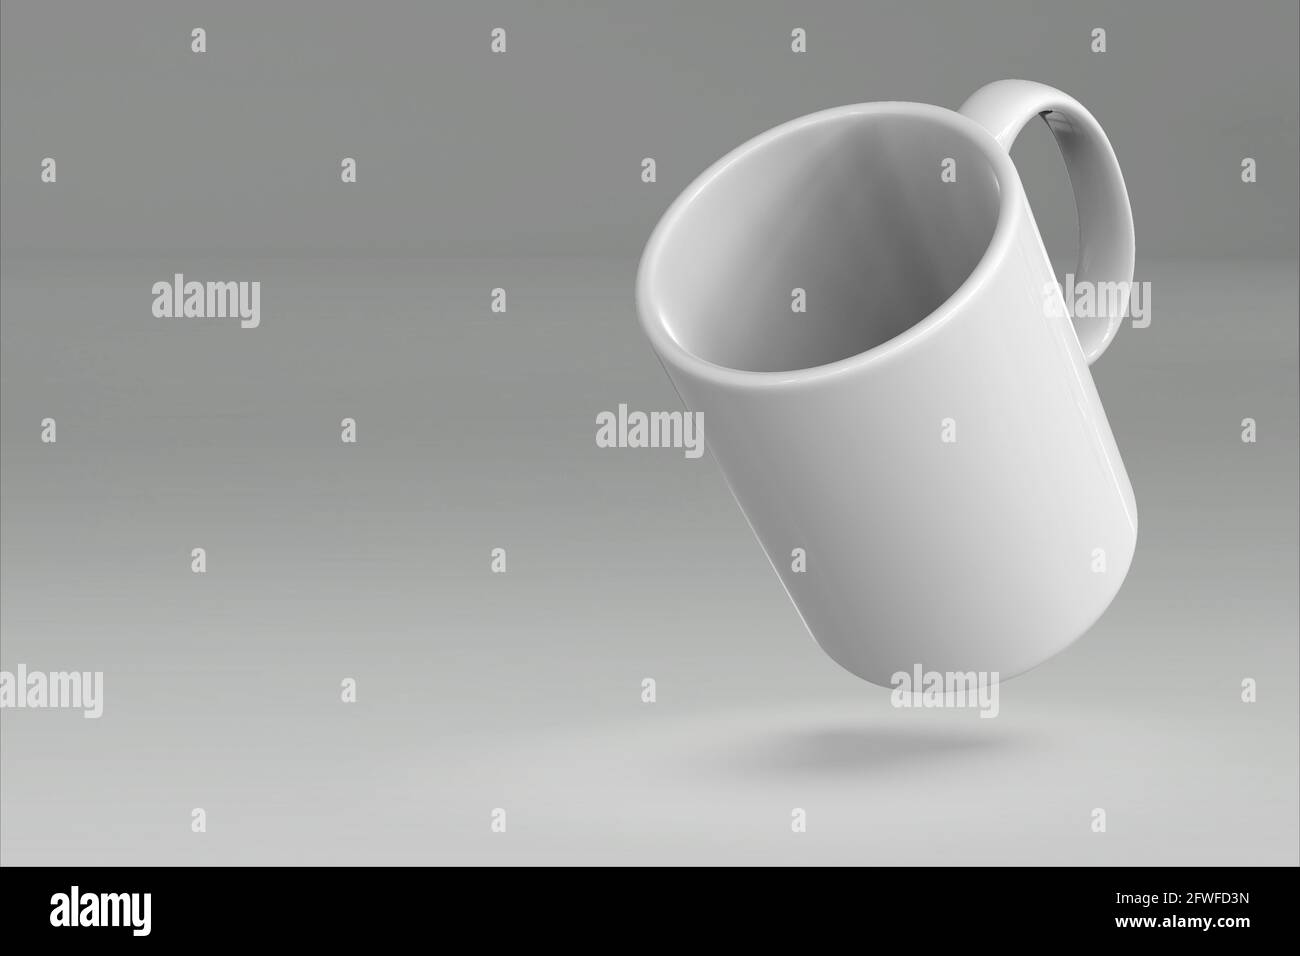 https://c8.alamy.com/comp/2FWFD3N/blank-mug-mockup-isolated-on-colored-3d-rendering-added-copy-space-for-text-suitable-for-your-design-project-2FWFD3N.jpg